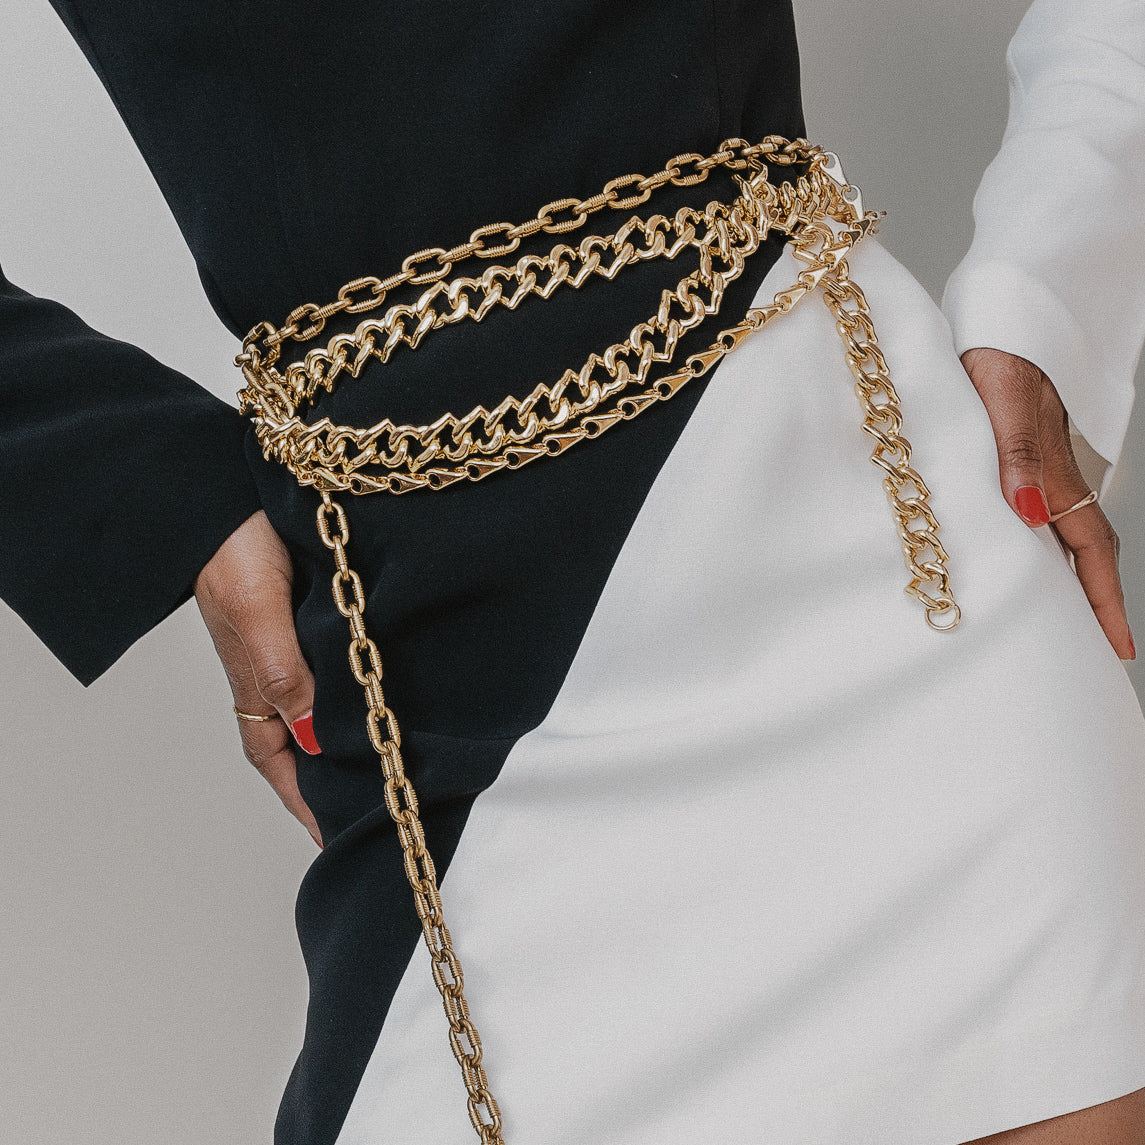 How To Style Chain Belts - 5 Easy Ways